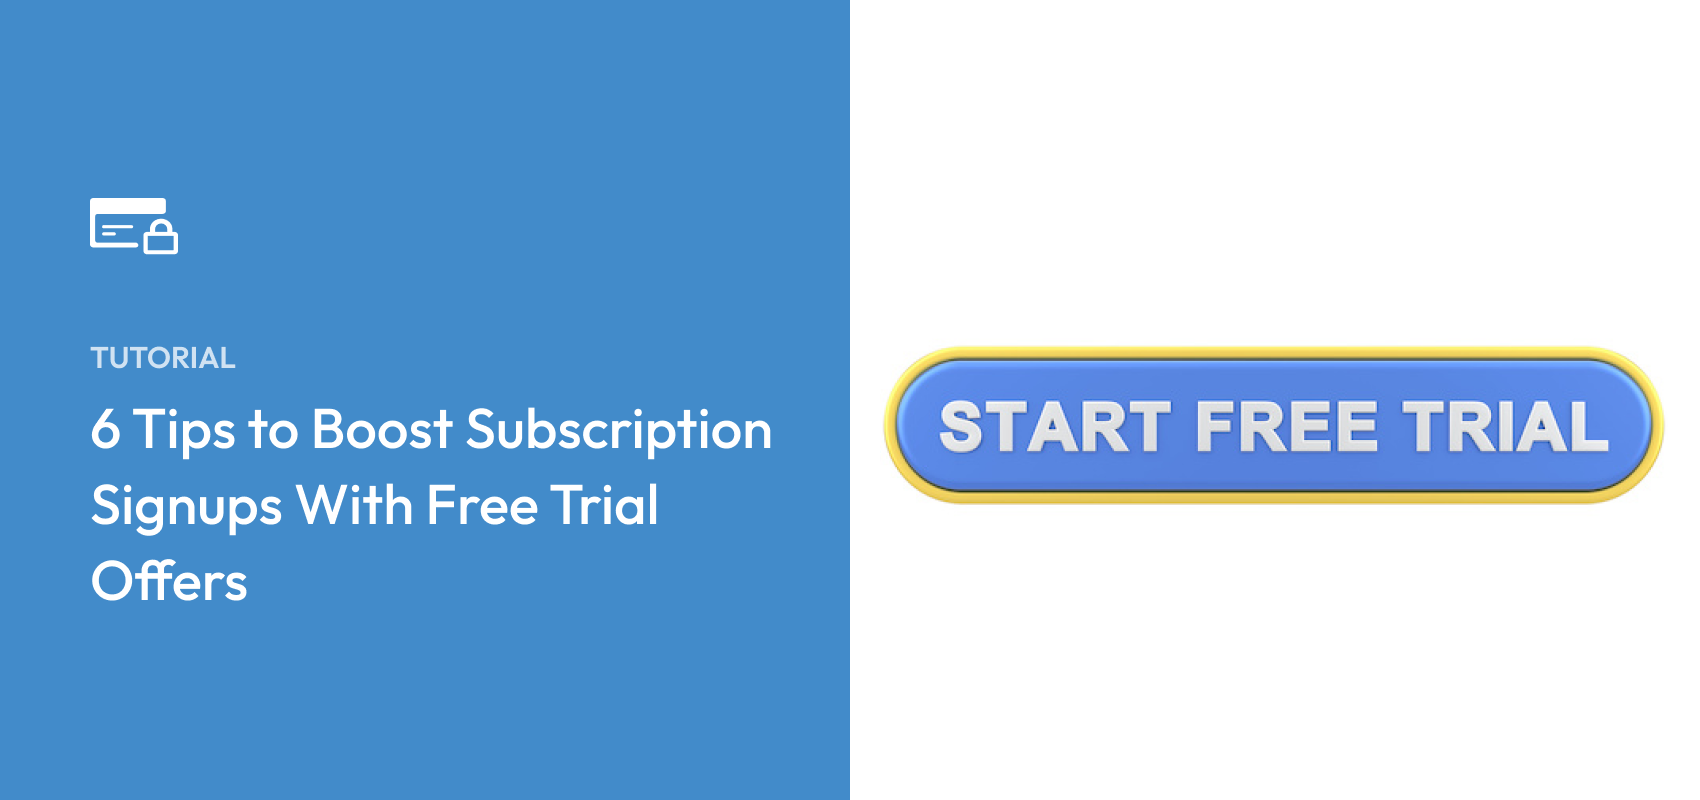 How to sign up for a free trial of Prime